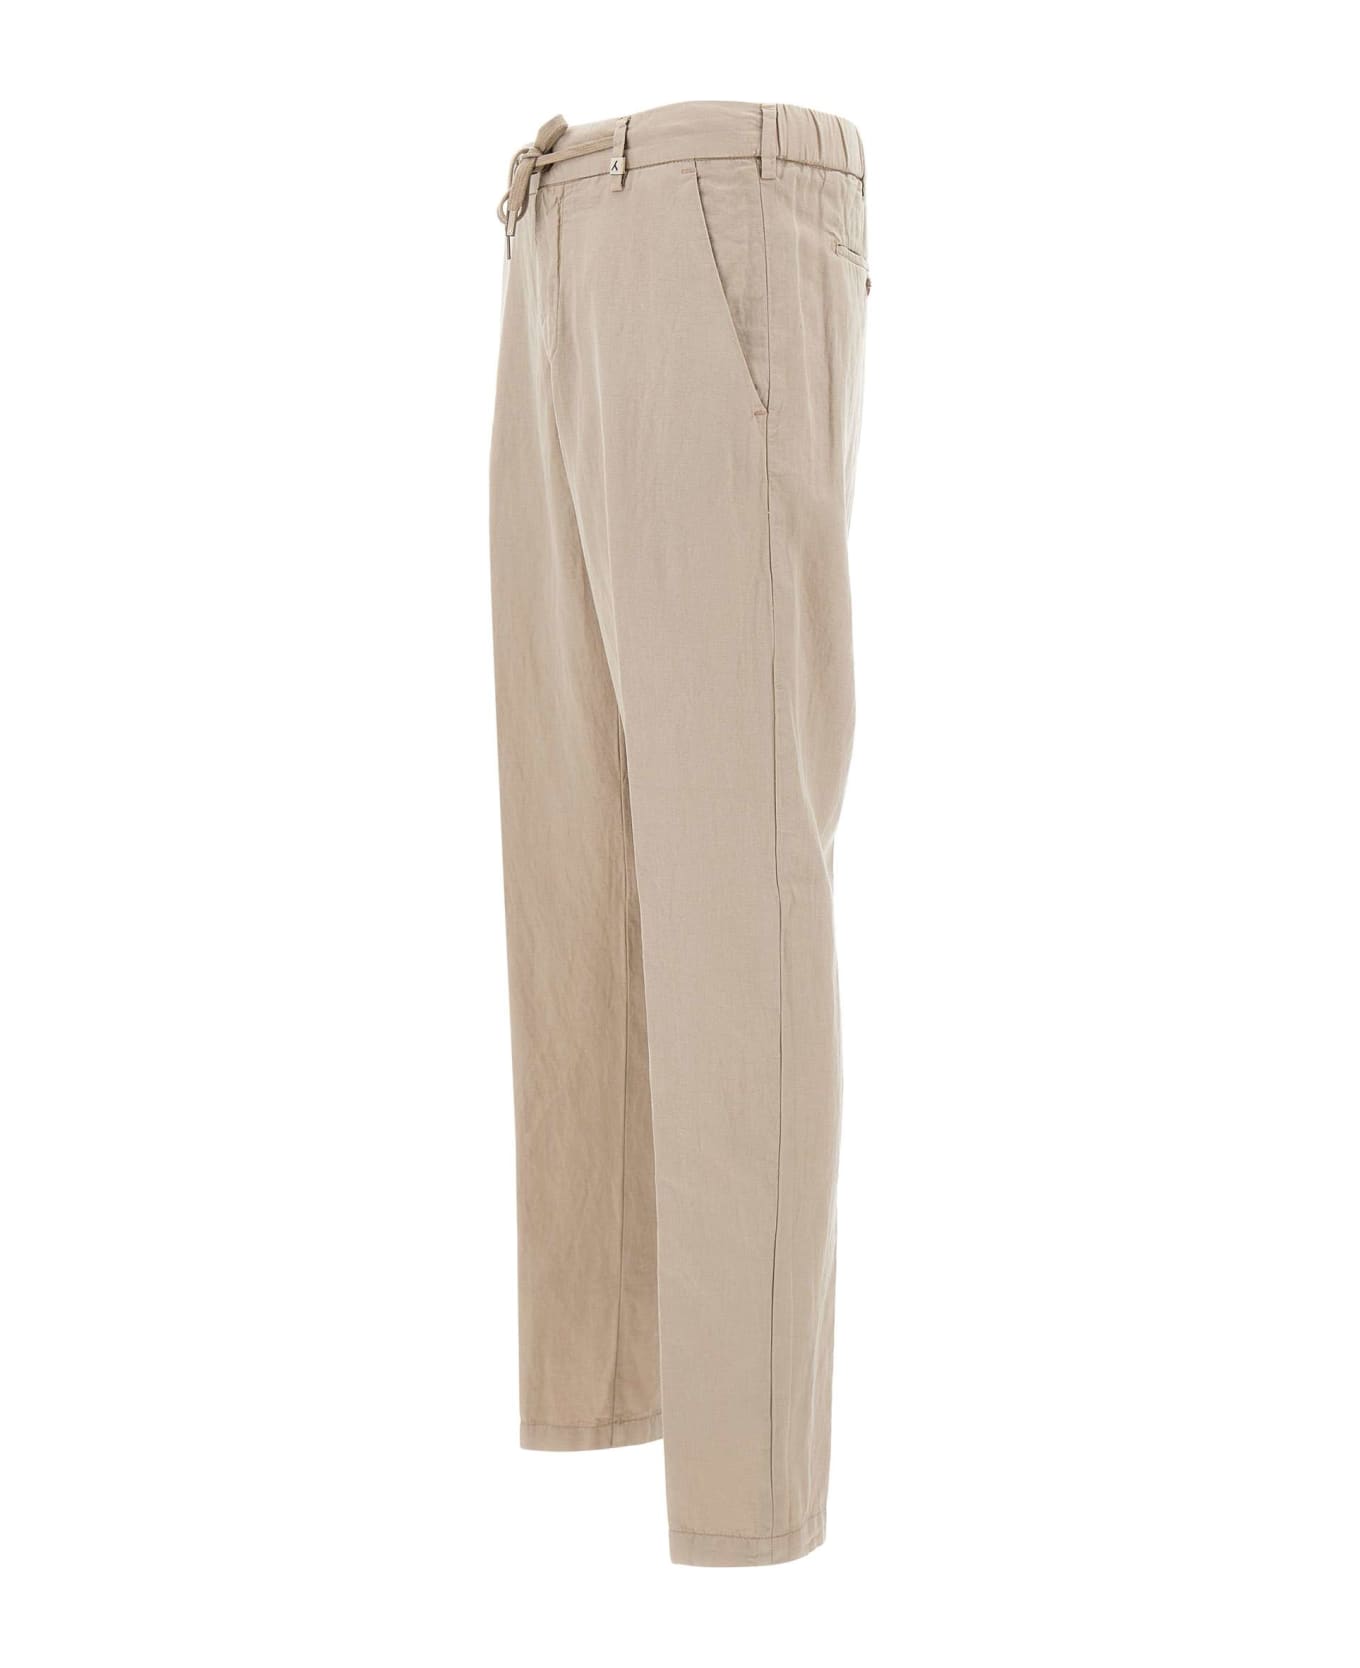 Myths 'apollo' Linen And Cotton Trousers - 20